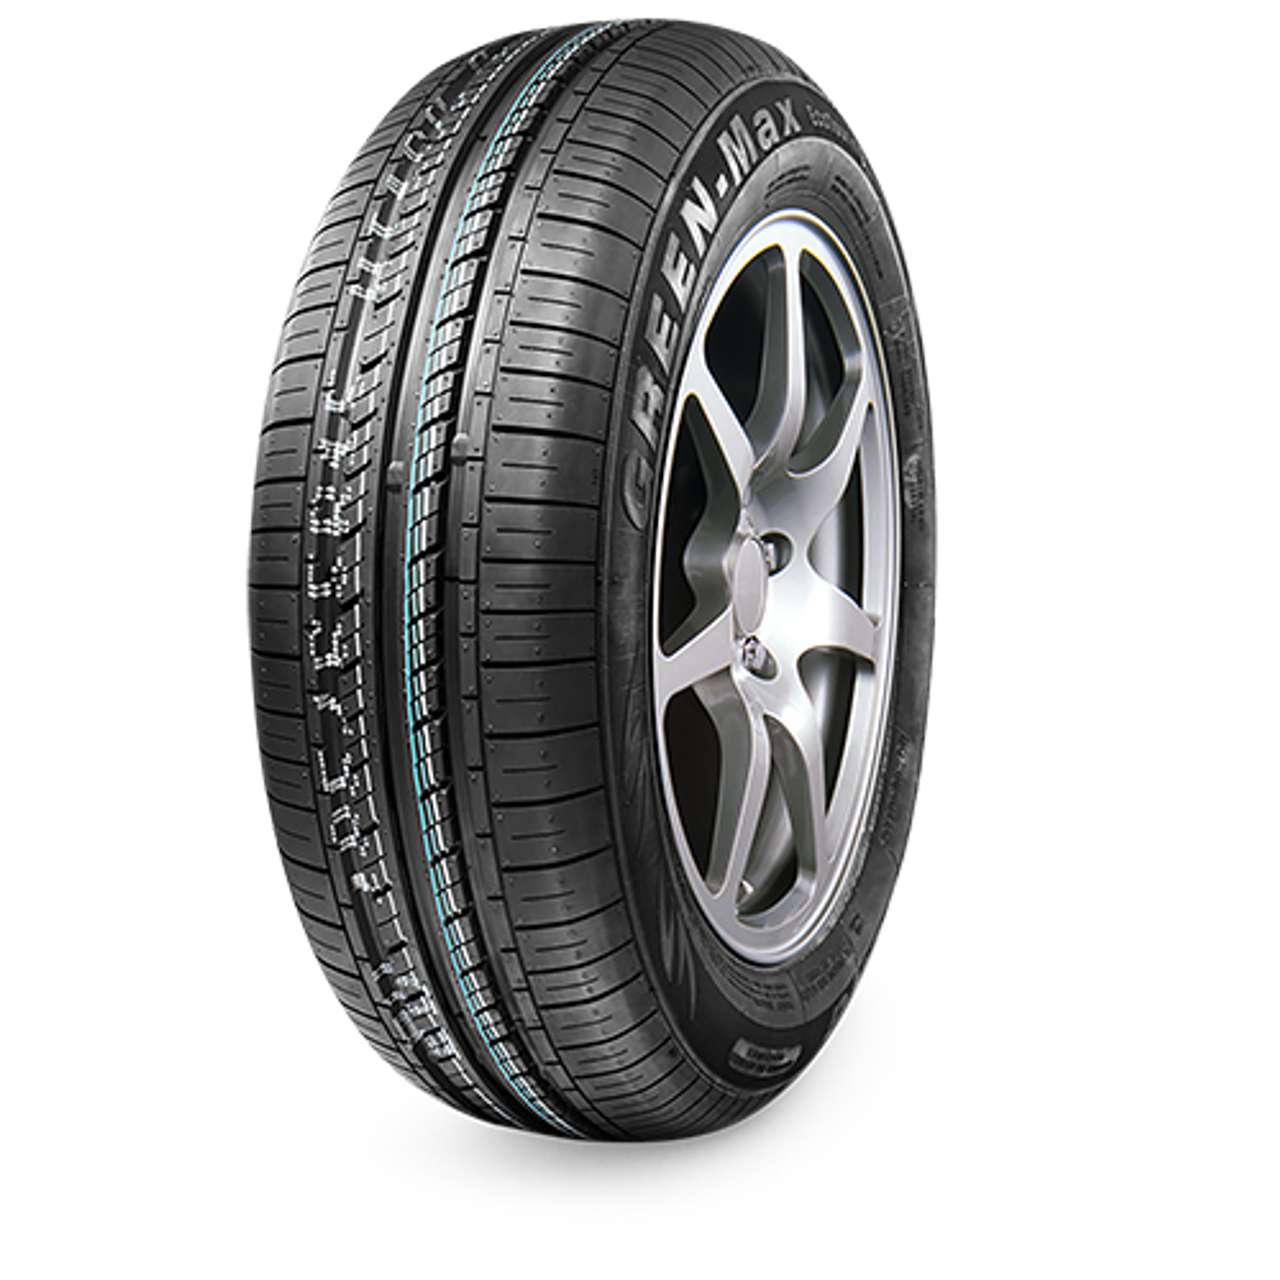 LINGLONG GREEN-MAX ECOTOURING 165/70R13 79T BSW